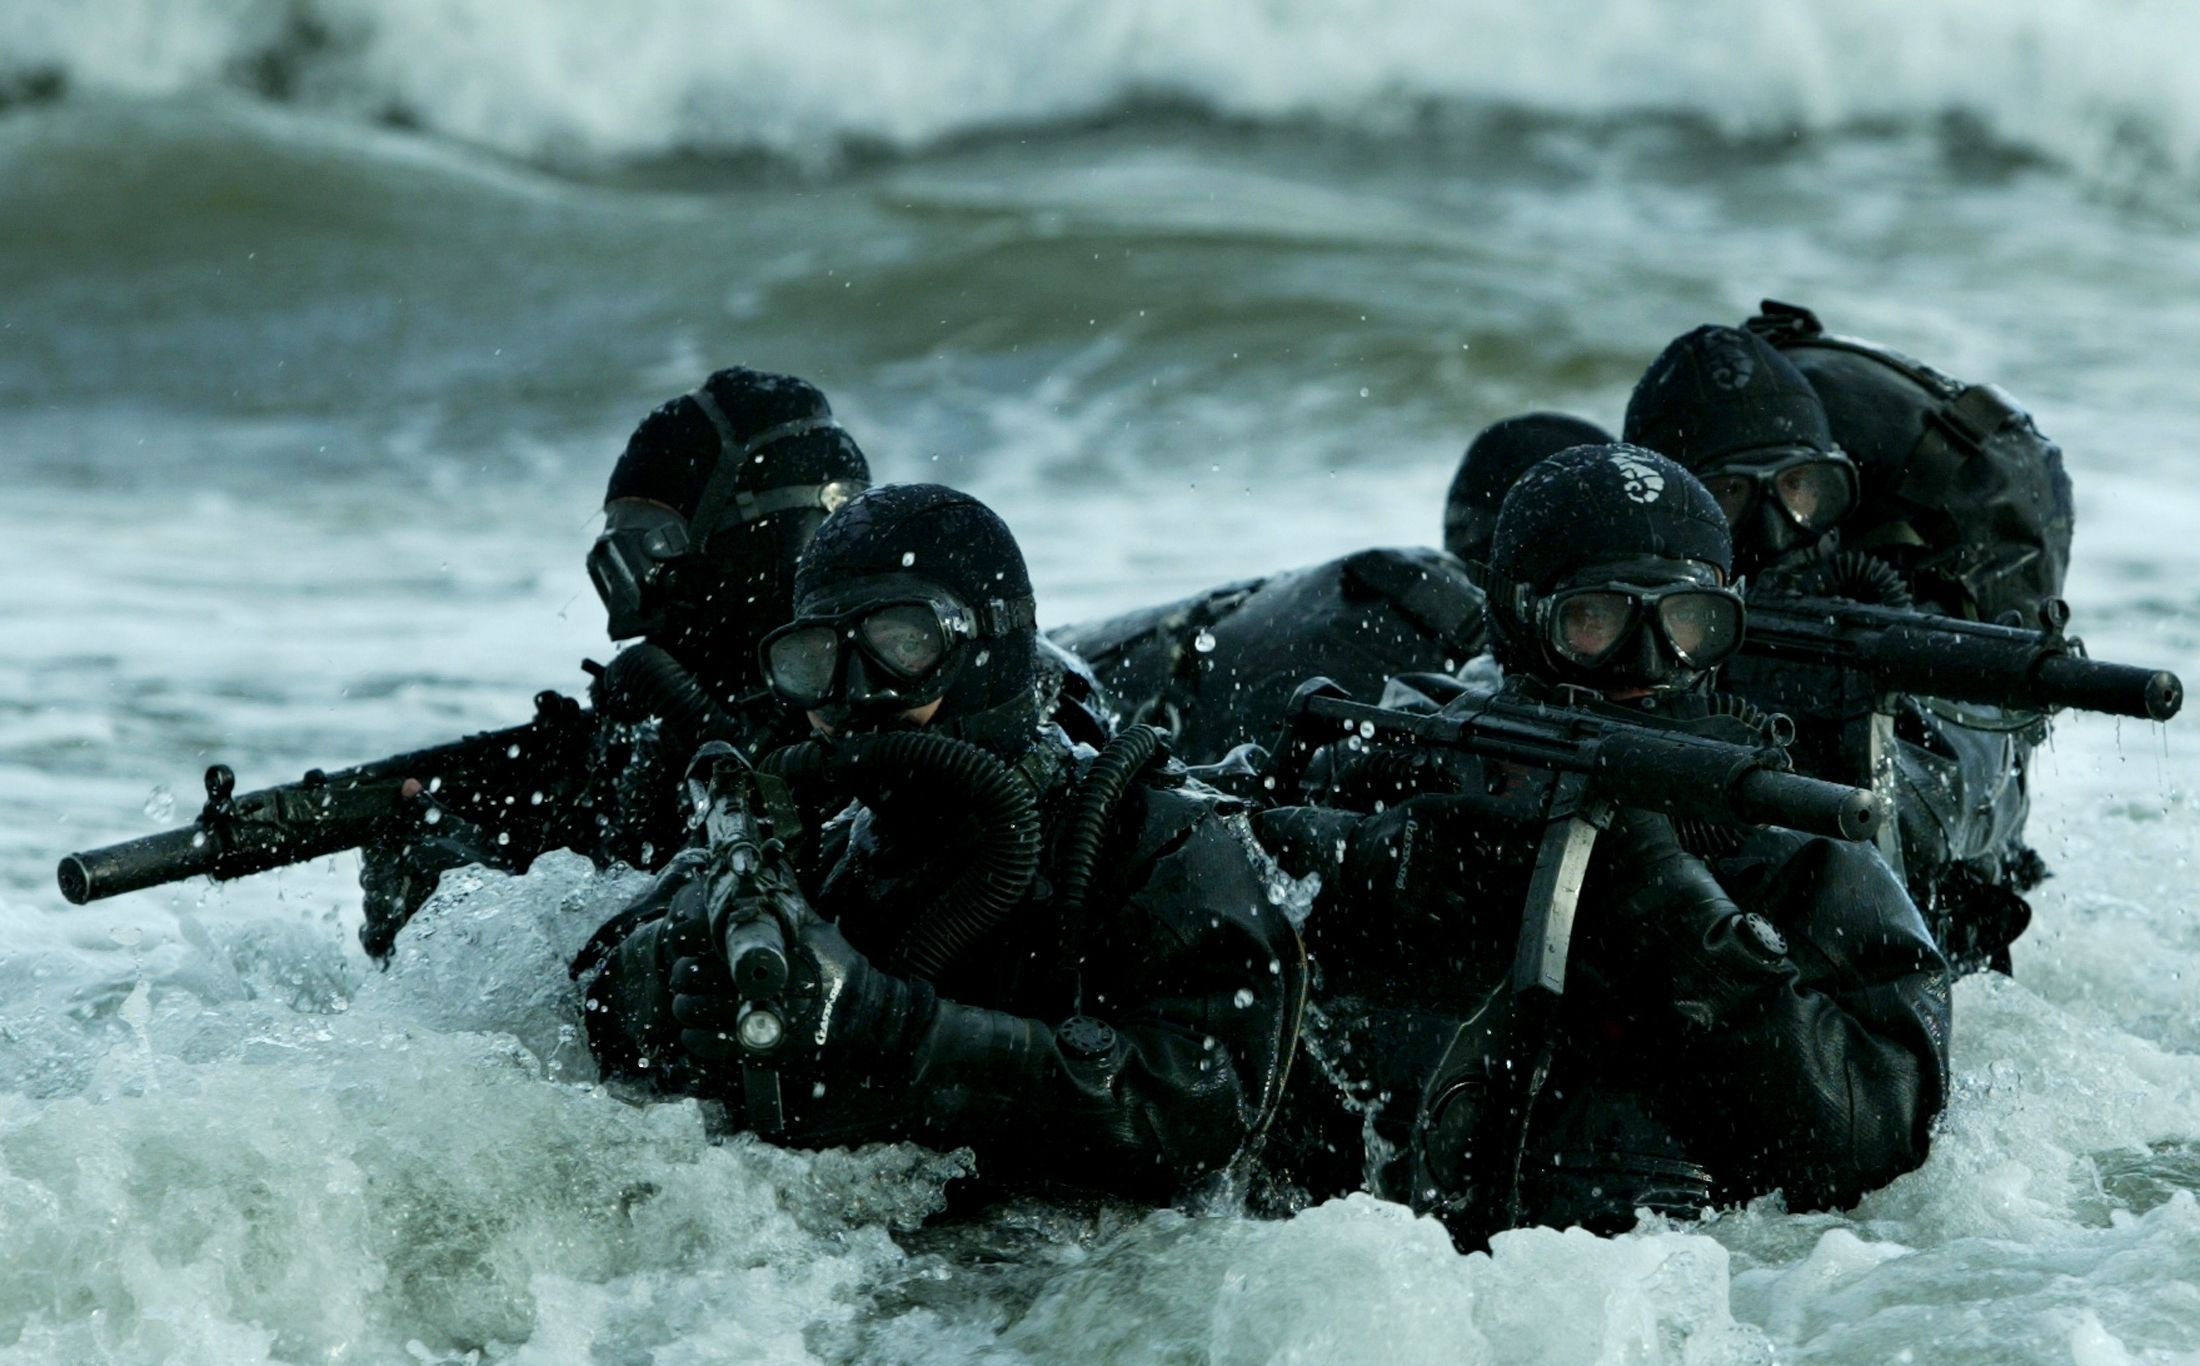 Free download military navy special forces navy seals 2200x1366 wallpaper Wallpaper [2200x1366] for your Desktop, Mobile & Tablet. Explore USAF Special Ops Wallpaper. USAF Special Ops Wallpaper, Special Ops